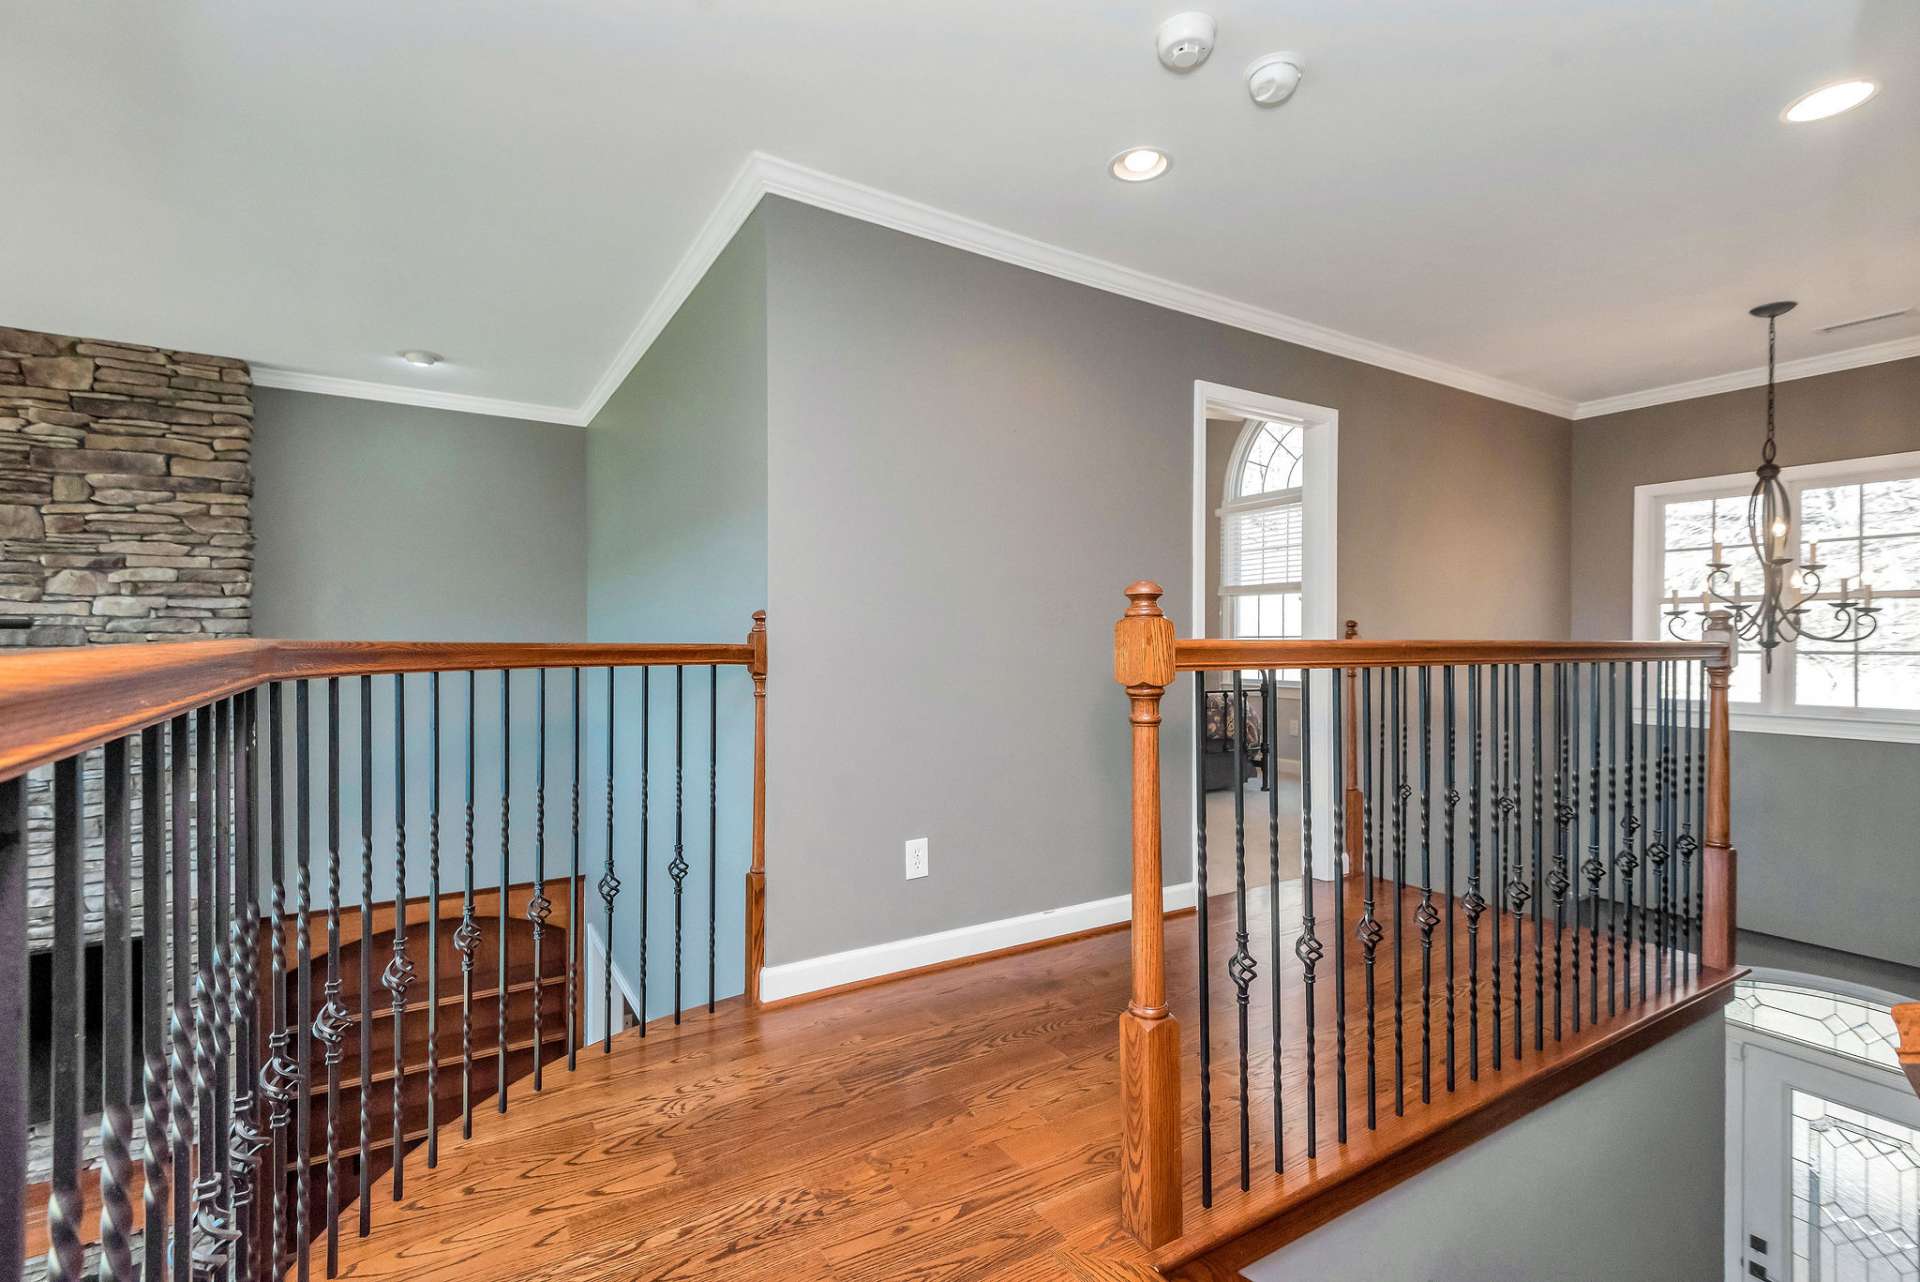 The balcony leads to upper-level bedrooms creating a sense of connection and continuity throughout the home.